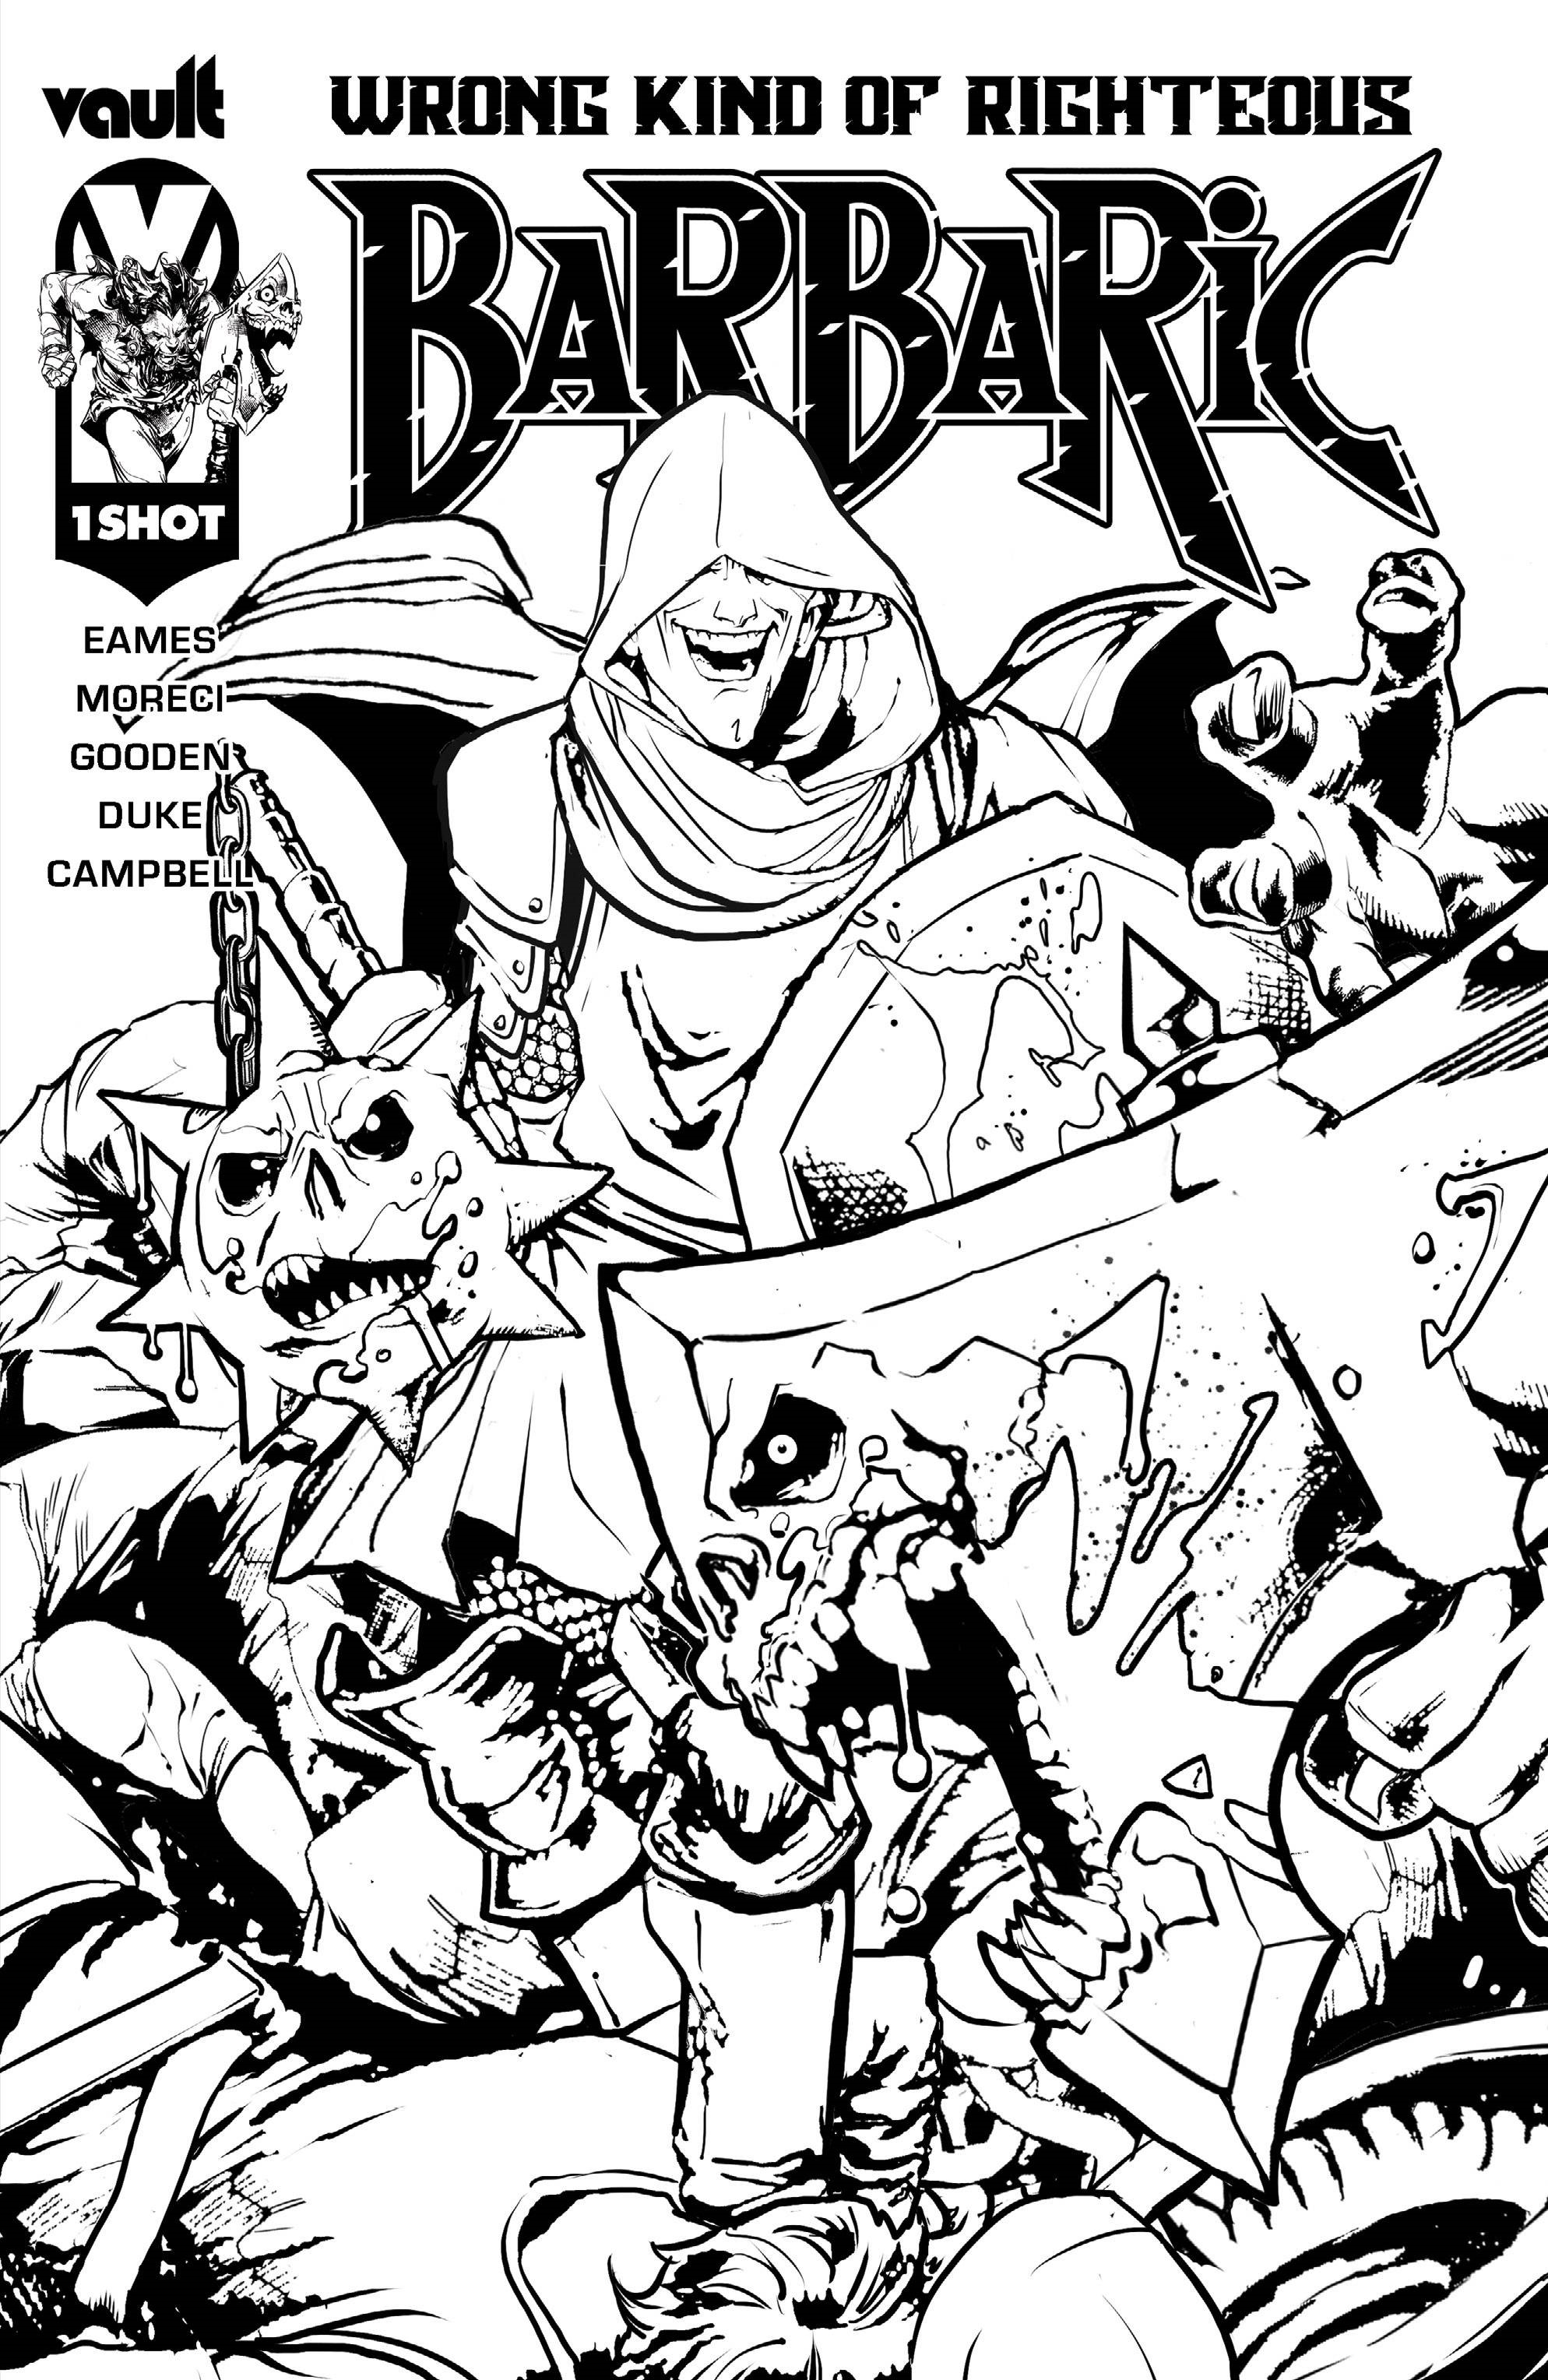 Barbaric Wrong Kind of Righteous #1 Cover D Nathan Gooden B&W 1 for 25 Incentive Cover